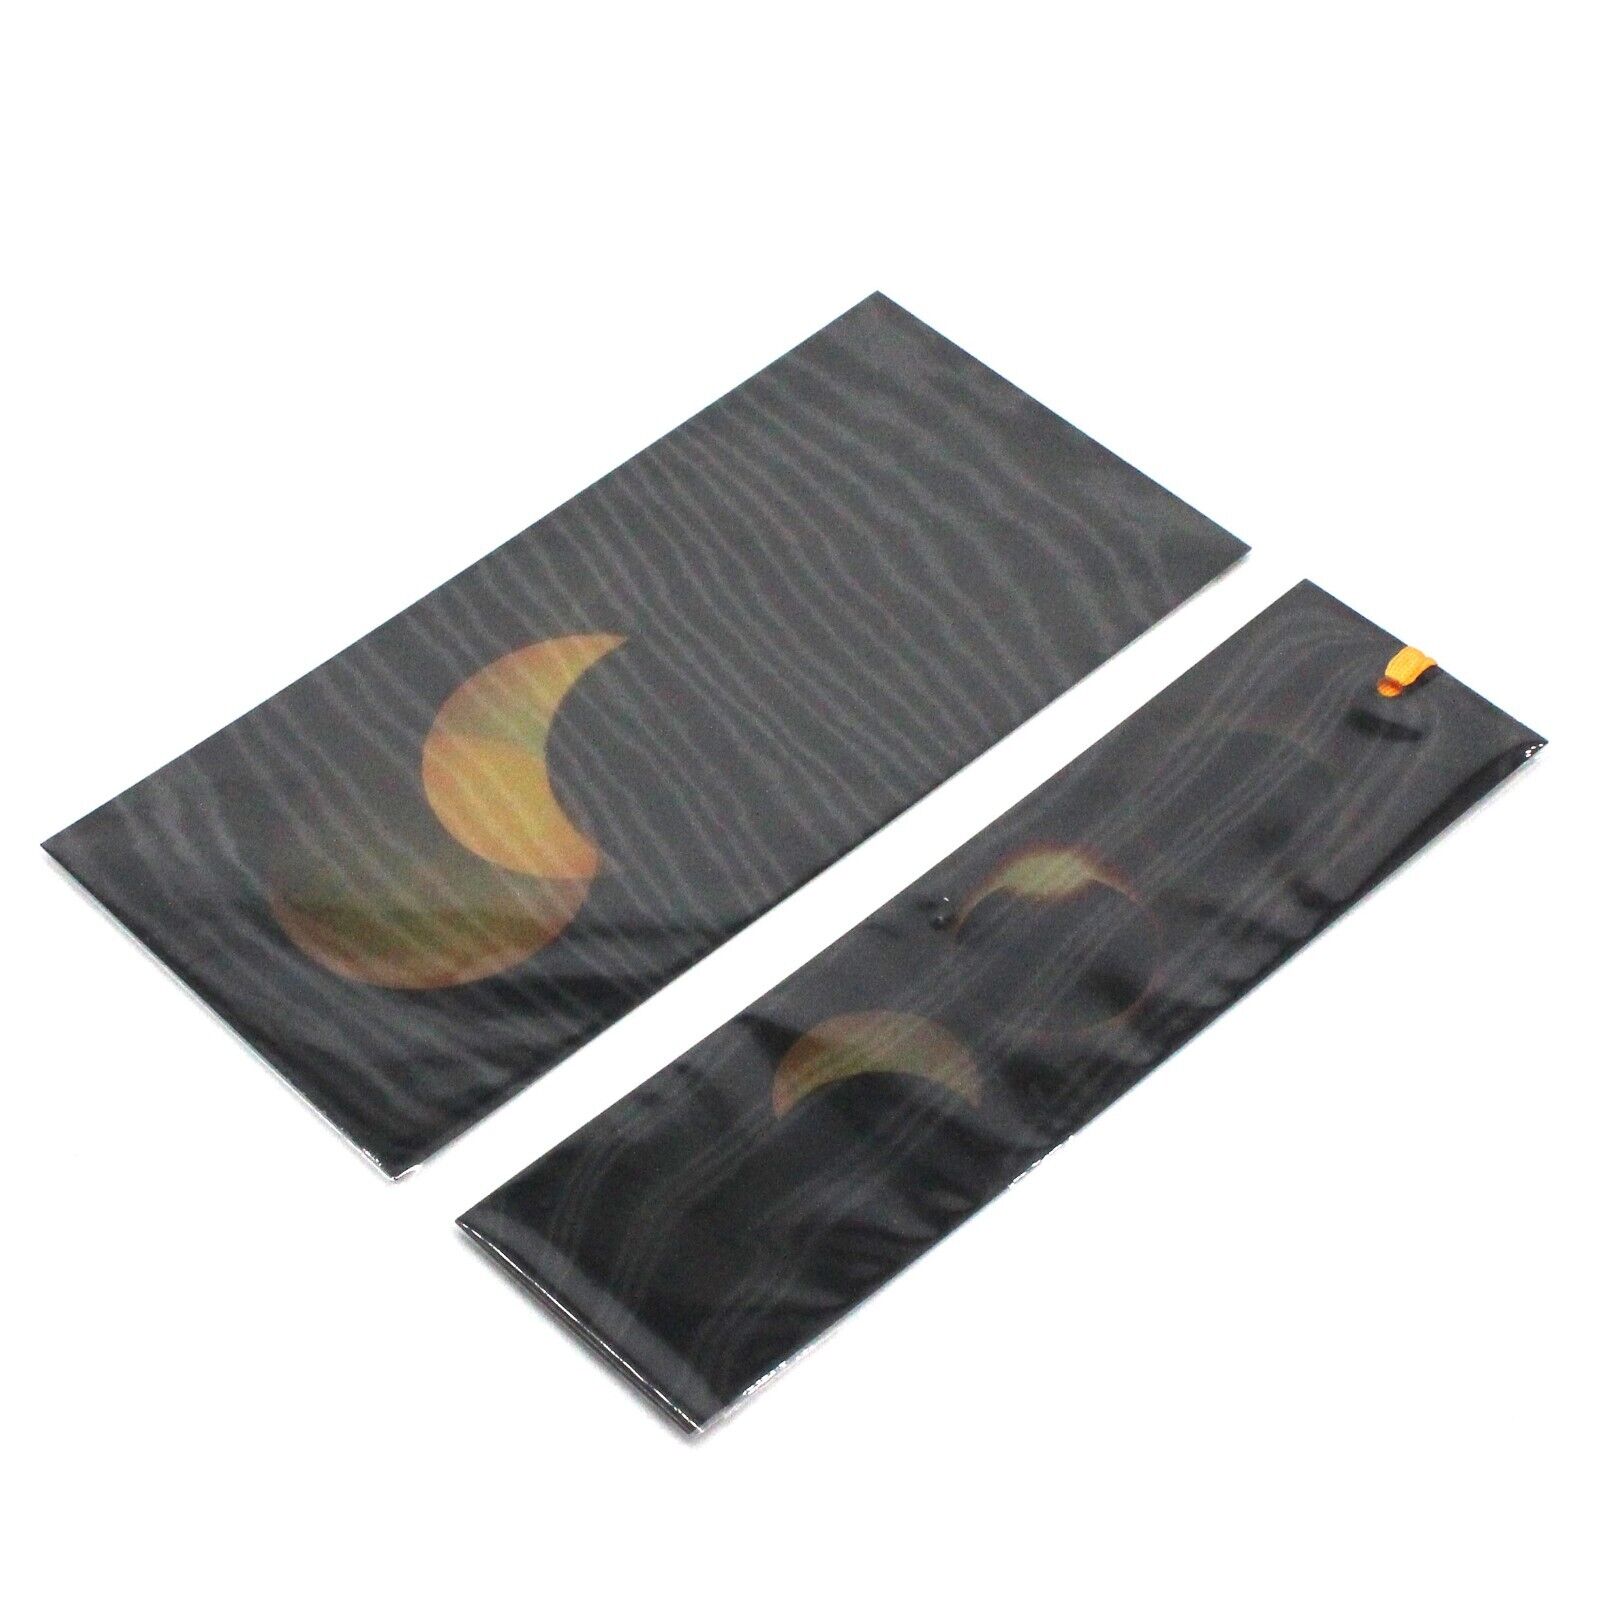 SOLAR ECLIPSE Postcard Greeting Card and Bookmark 3D Motion Lenticular